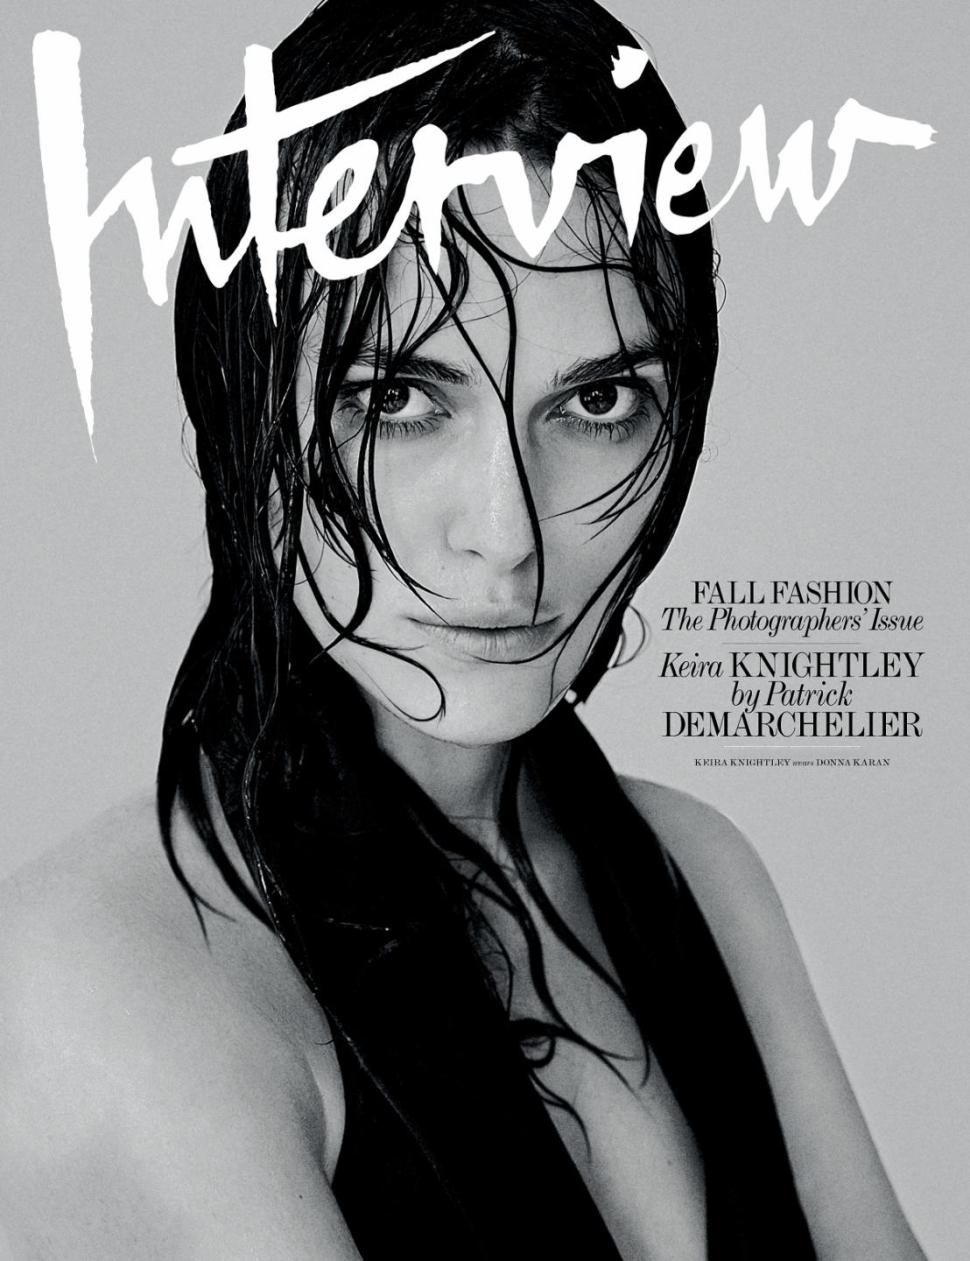 Keira Knightley shoots a sultry stare on the cover of Interview.